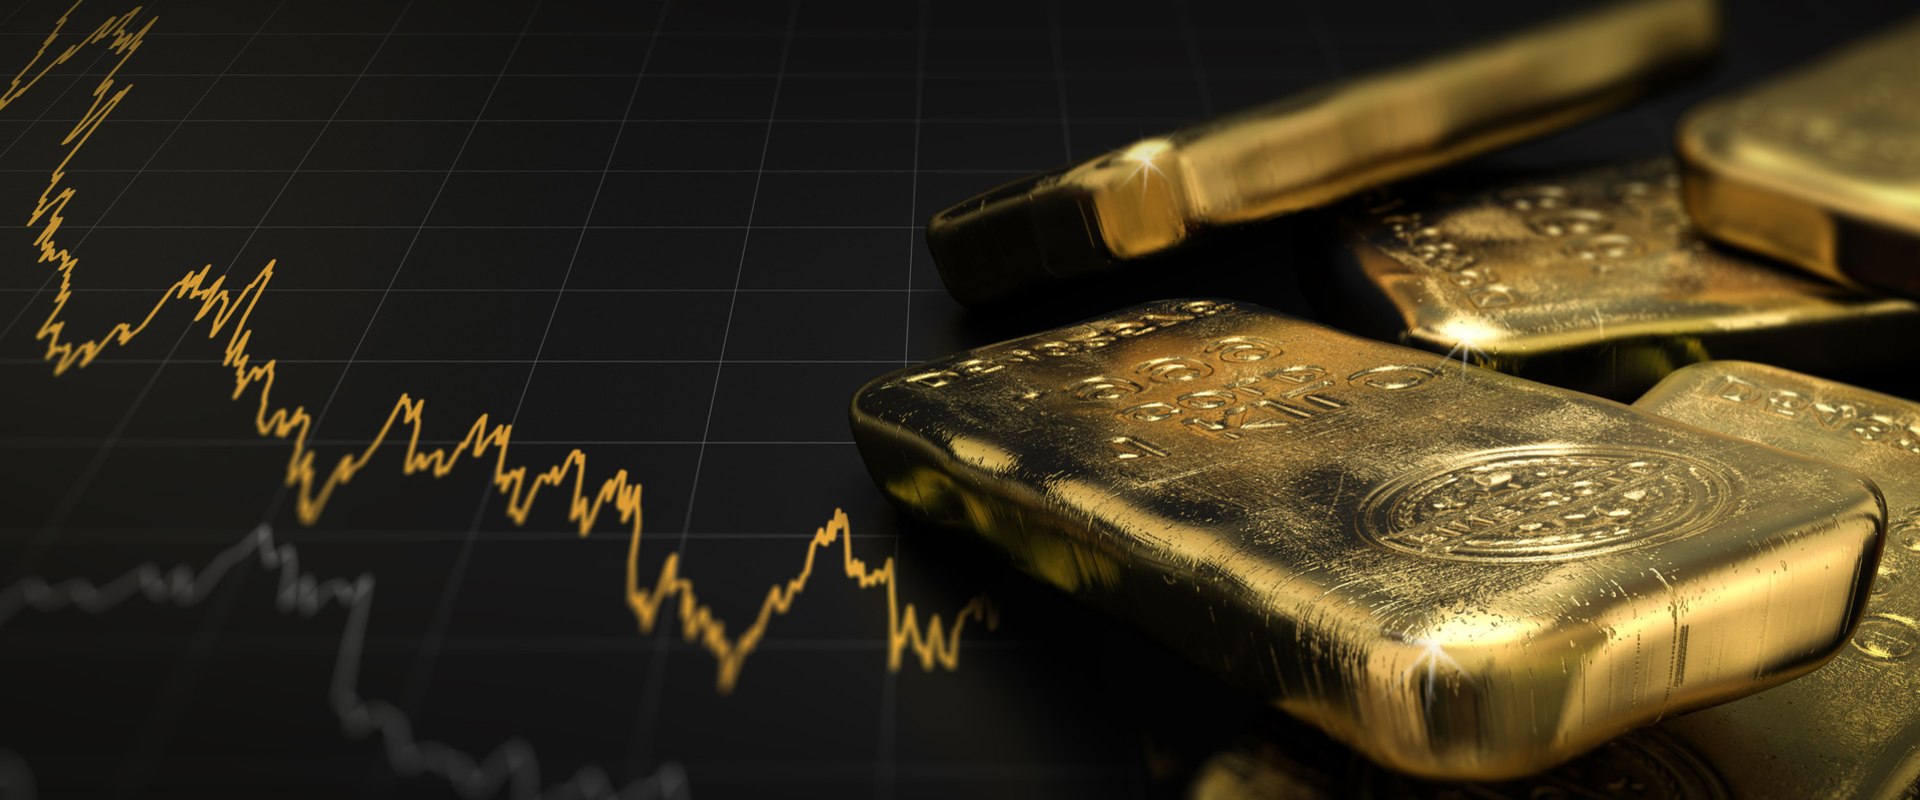 Gold or Silver: Which is the Better Long-Term Investment?